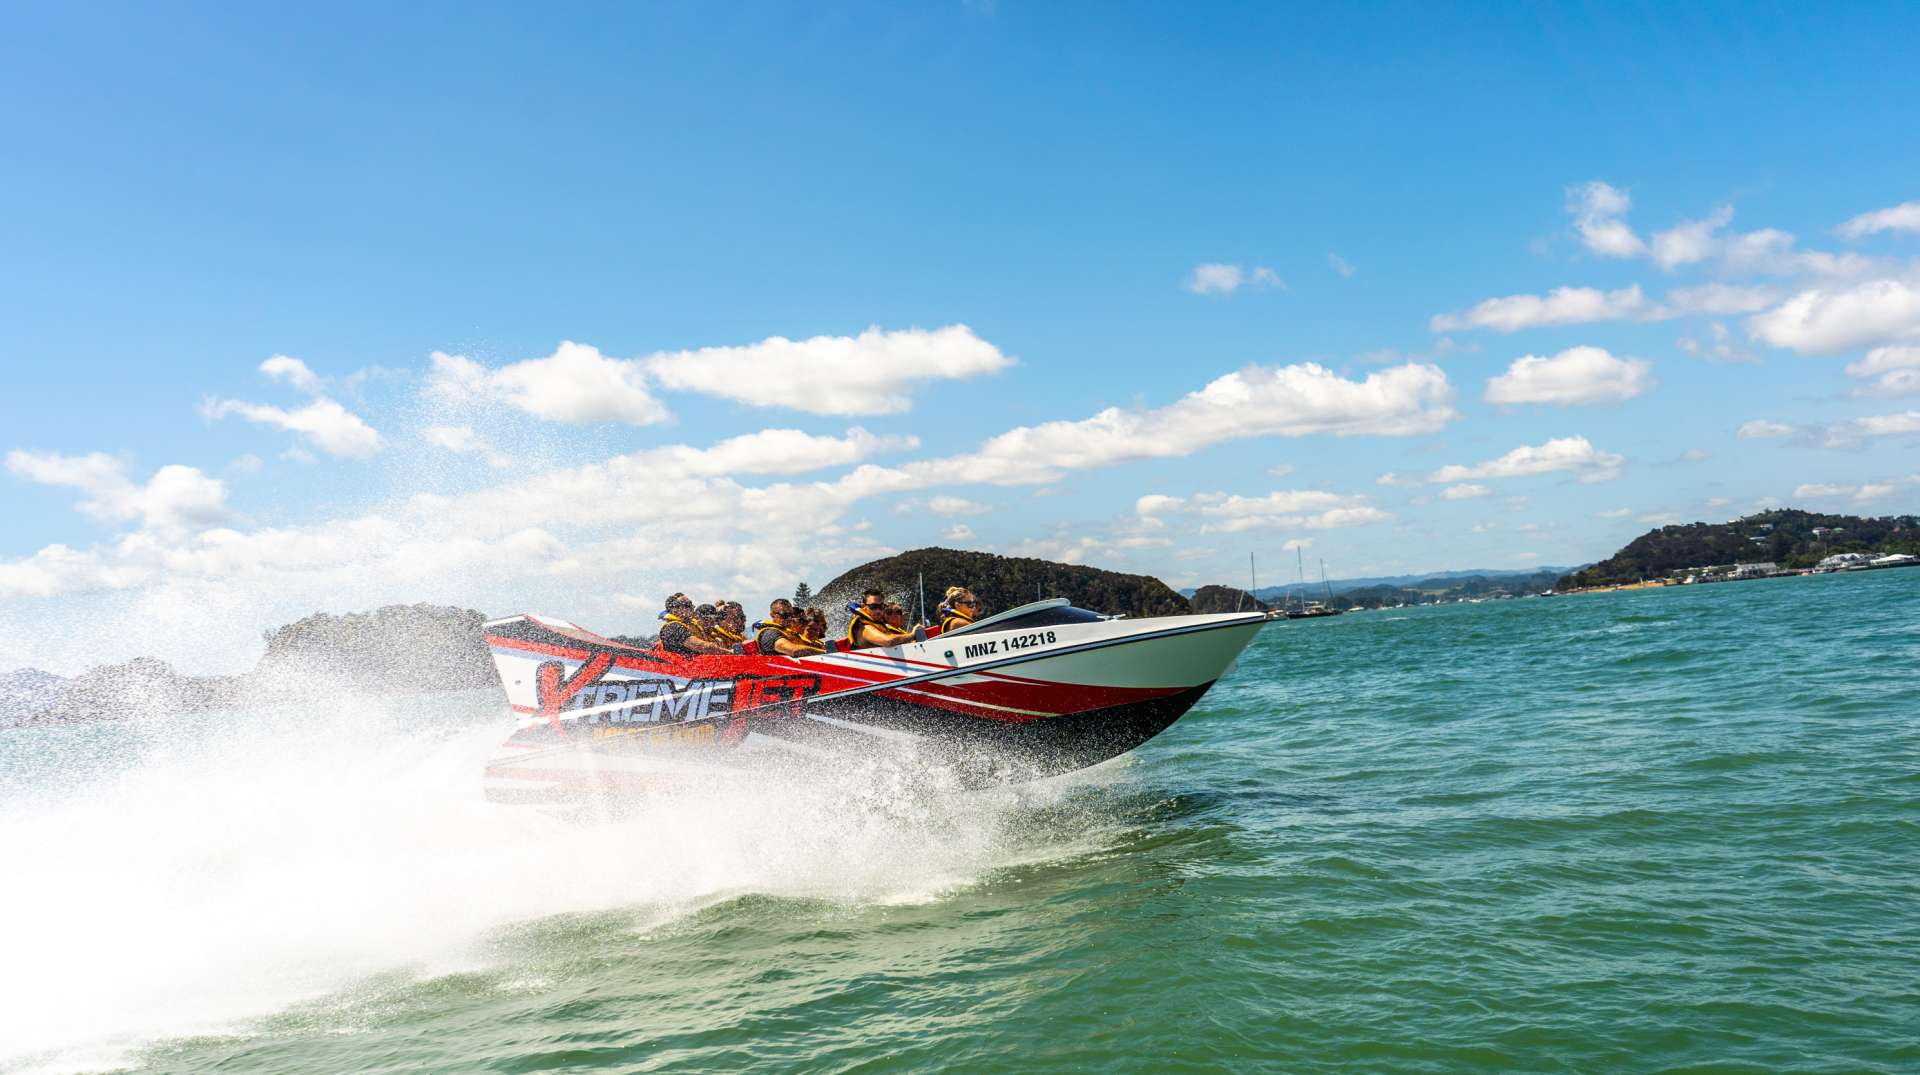 Jet boat ride attraction activity in the Bay of Islands